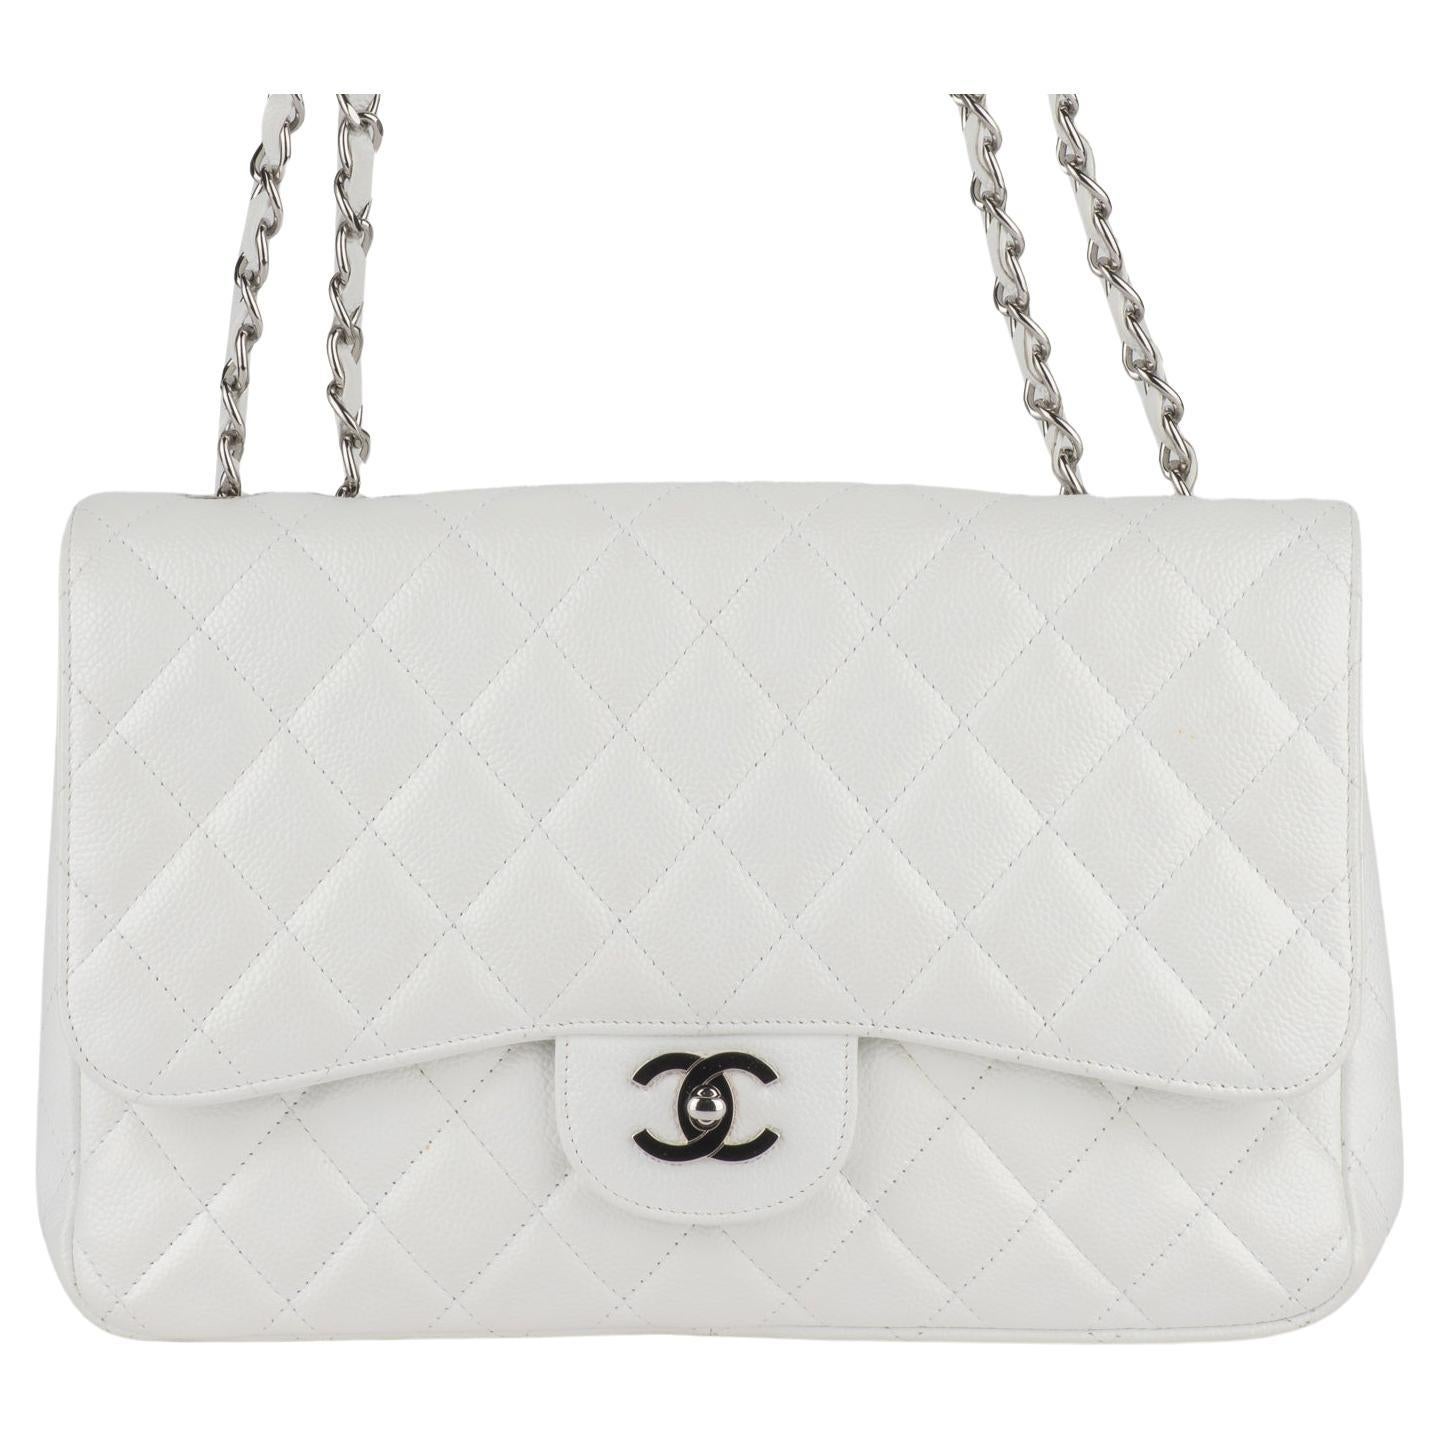 Chanel jumbo single Flap Bag features white diamond quilted leather. A leather-threaded polished silver chain-link shoulder strap, a rear patch pocket, and a matching silver classic CC turn-lock. This opens the bag to reveal an inner zipper pocket.